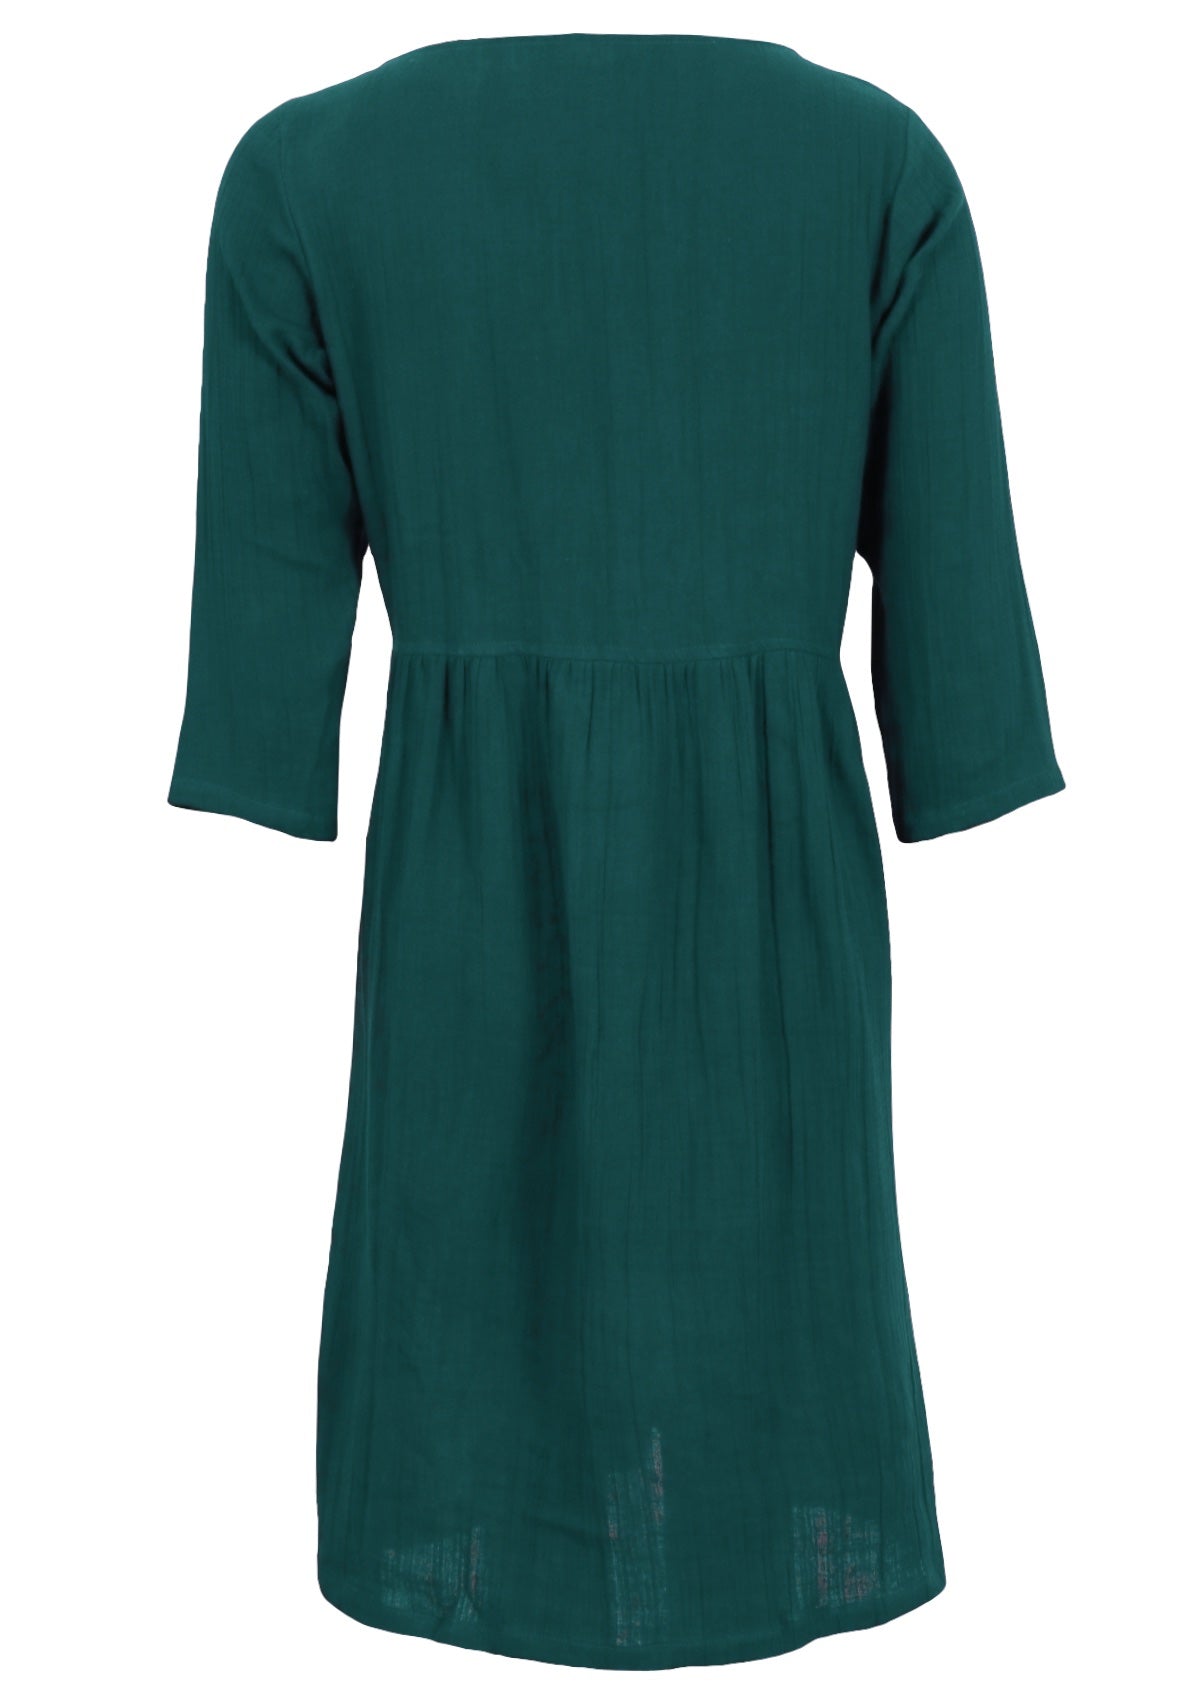 Lightweight cotton gauze relaxed fit dress with 3/4 sleeves